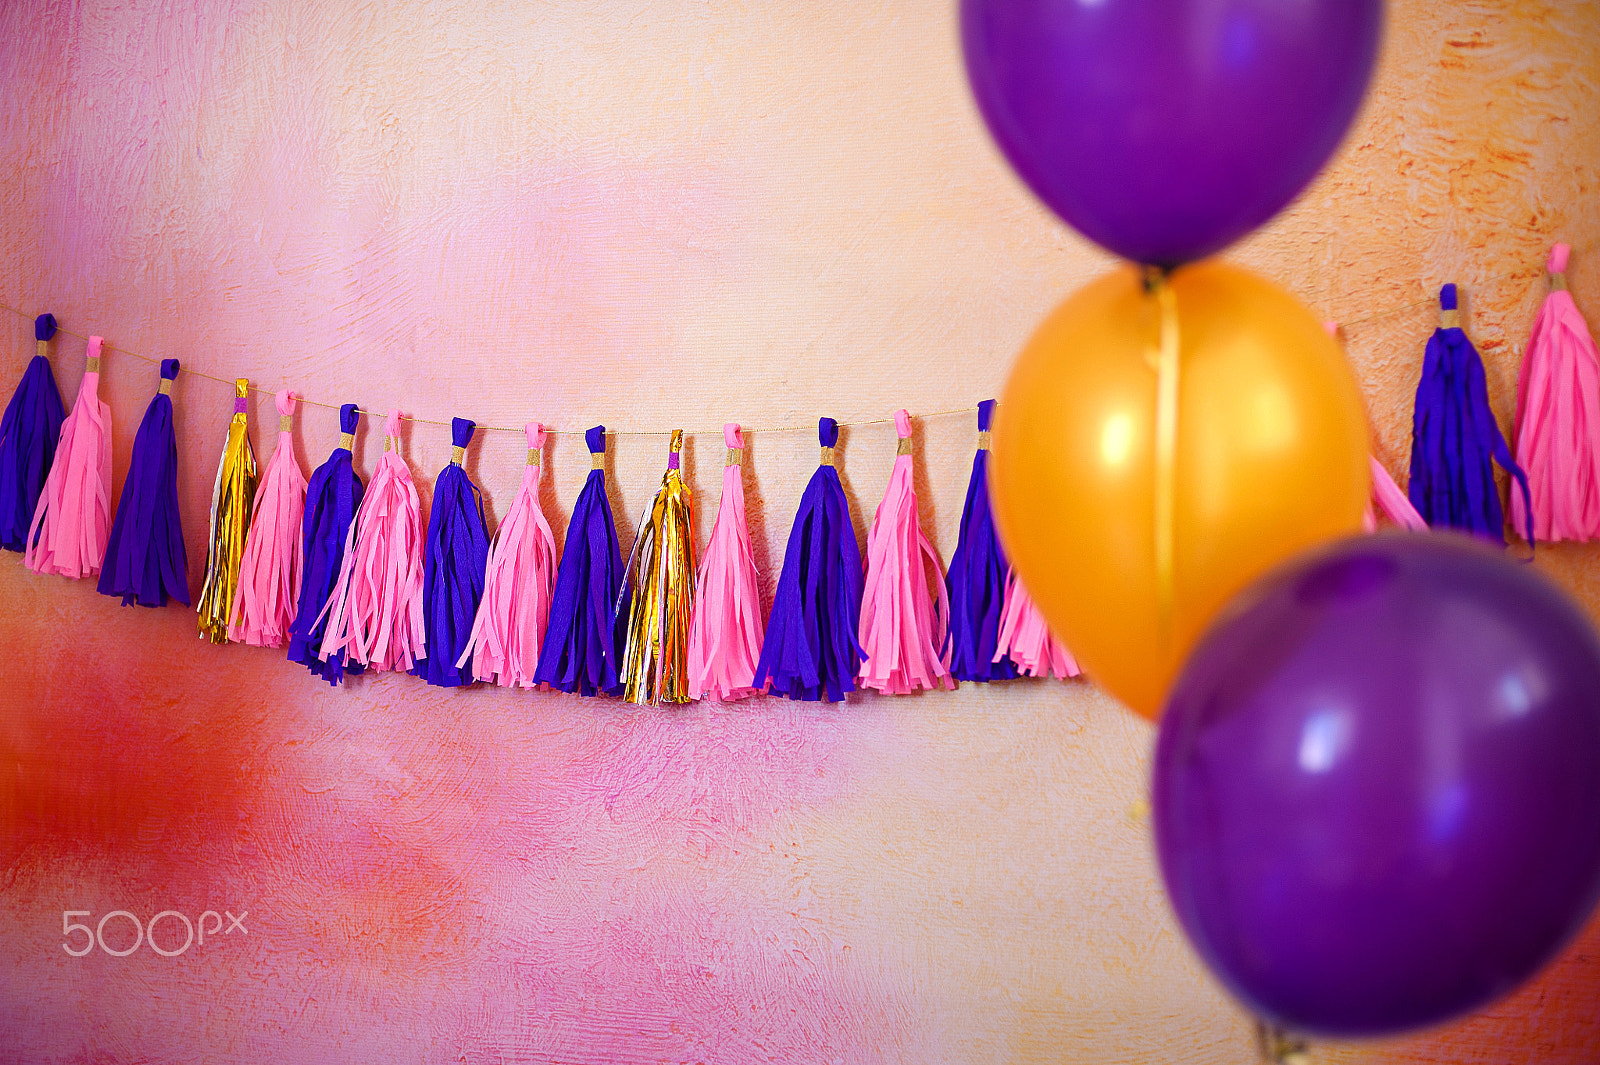 Nikon D700 + Nikon AF Nikkor 50mm F1.4D sample photo. Garland on a painted background with multi-colored balloons photography